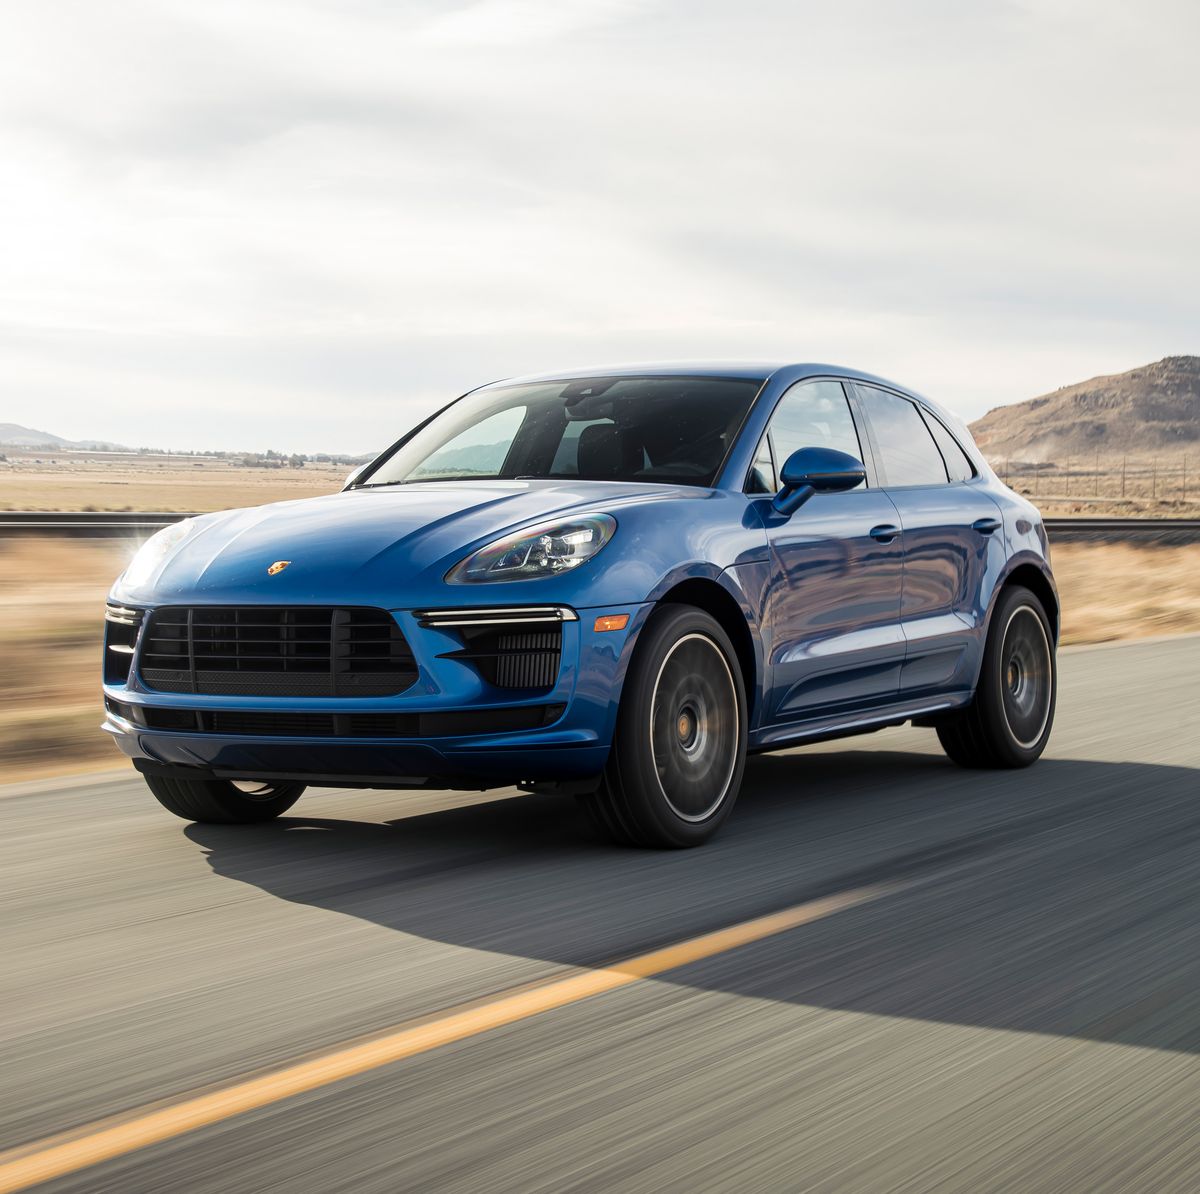 Tested: 2020 Porsche Macan Turbo Remains an SUV Benchmark